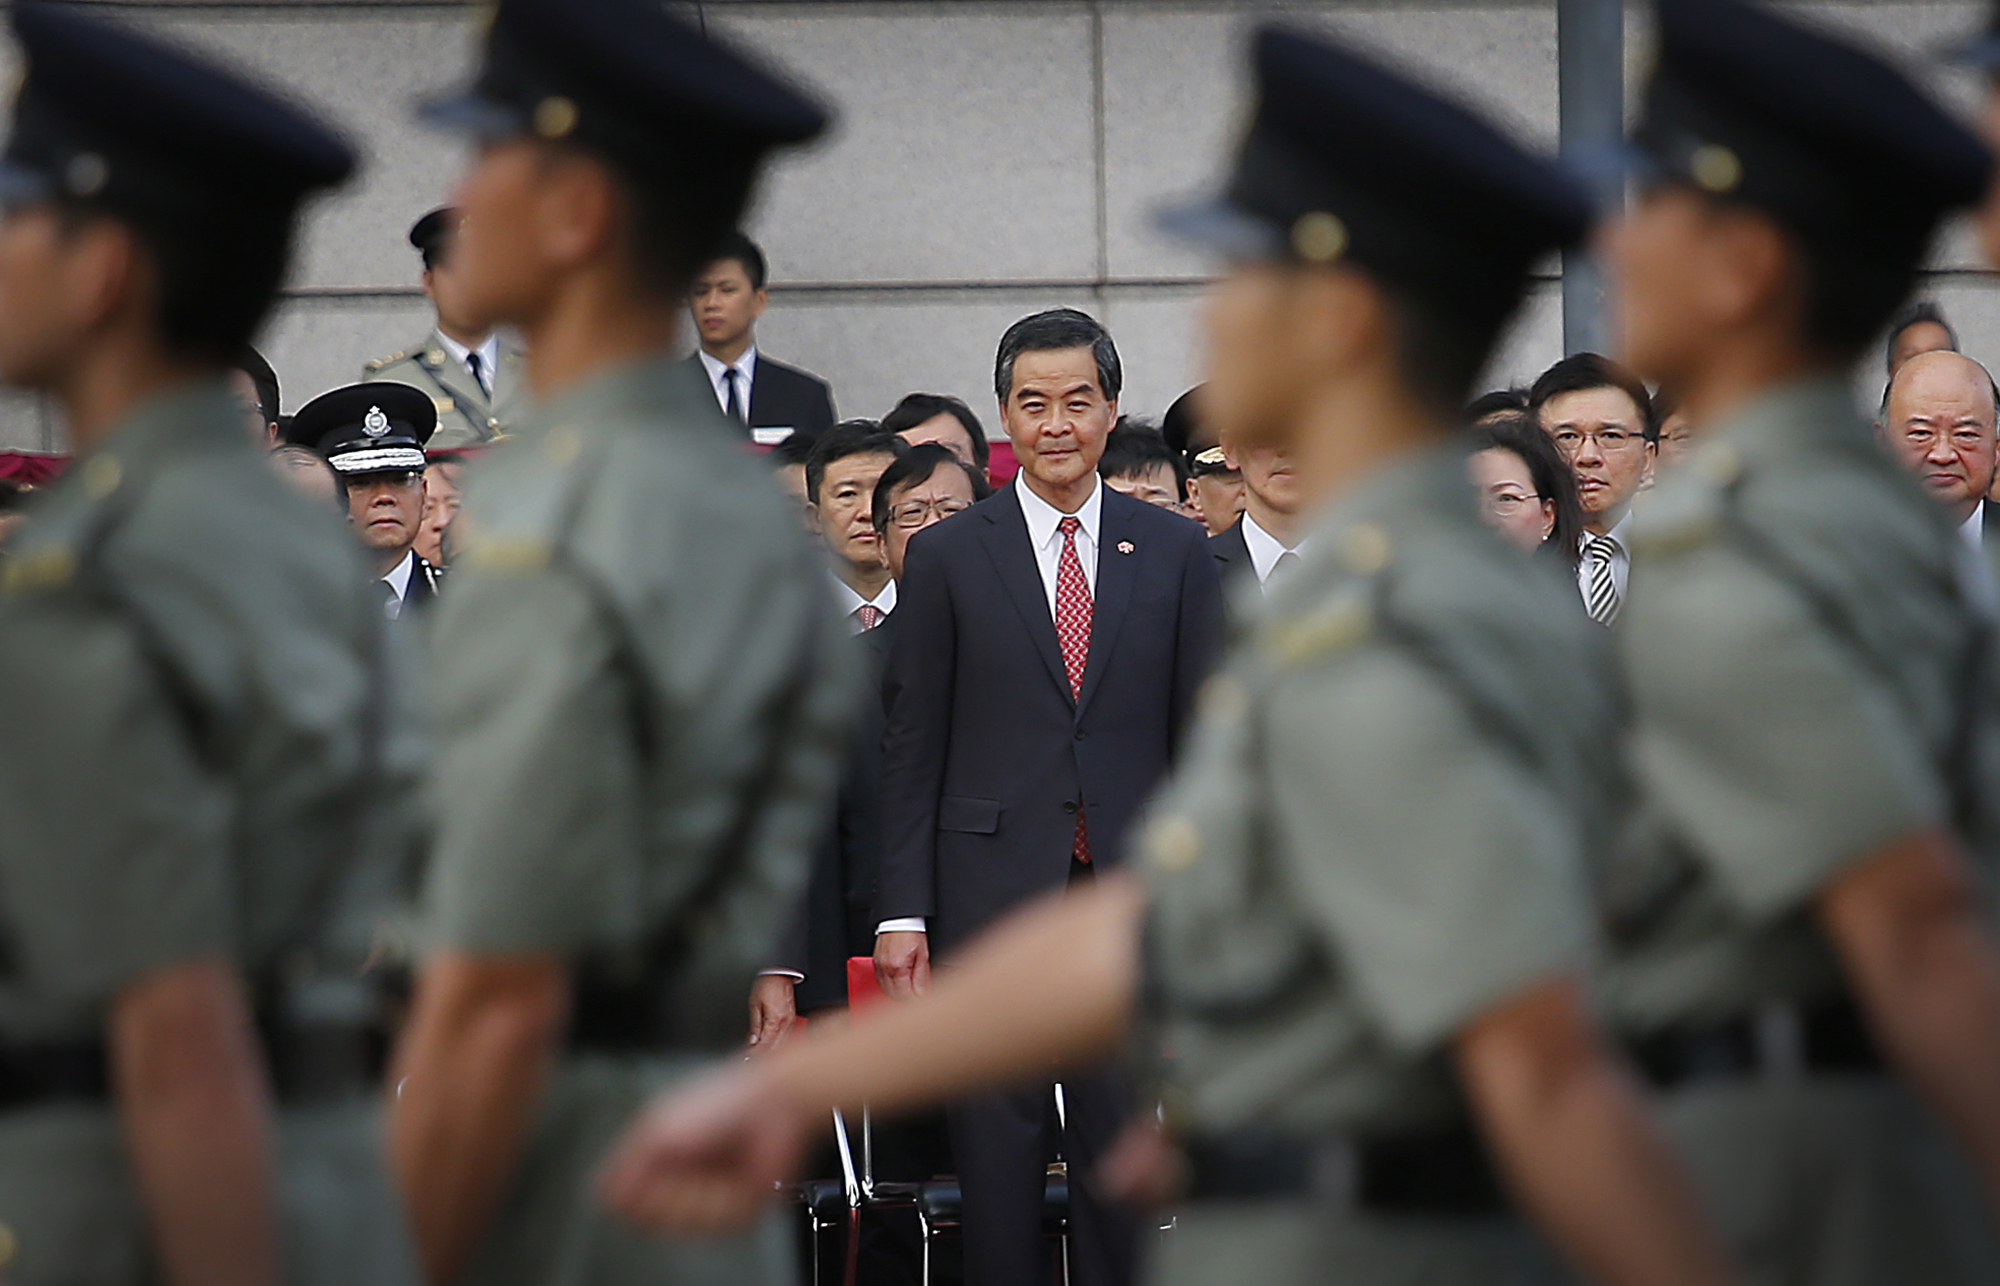 PHOTO: Hong Kong's Chief Executive Leung Chun-ying, center, watches as military personnel march during a flag-raising ceremony on Wednesday, Oct. 1, 2014 in Hong Kong.